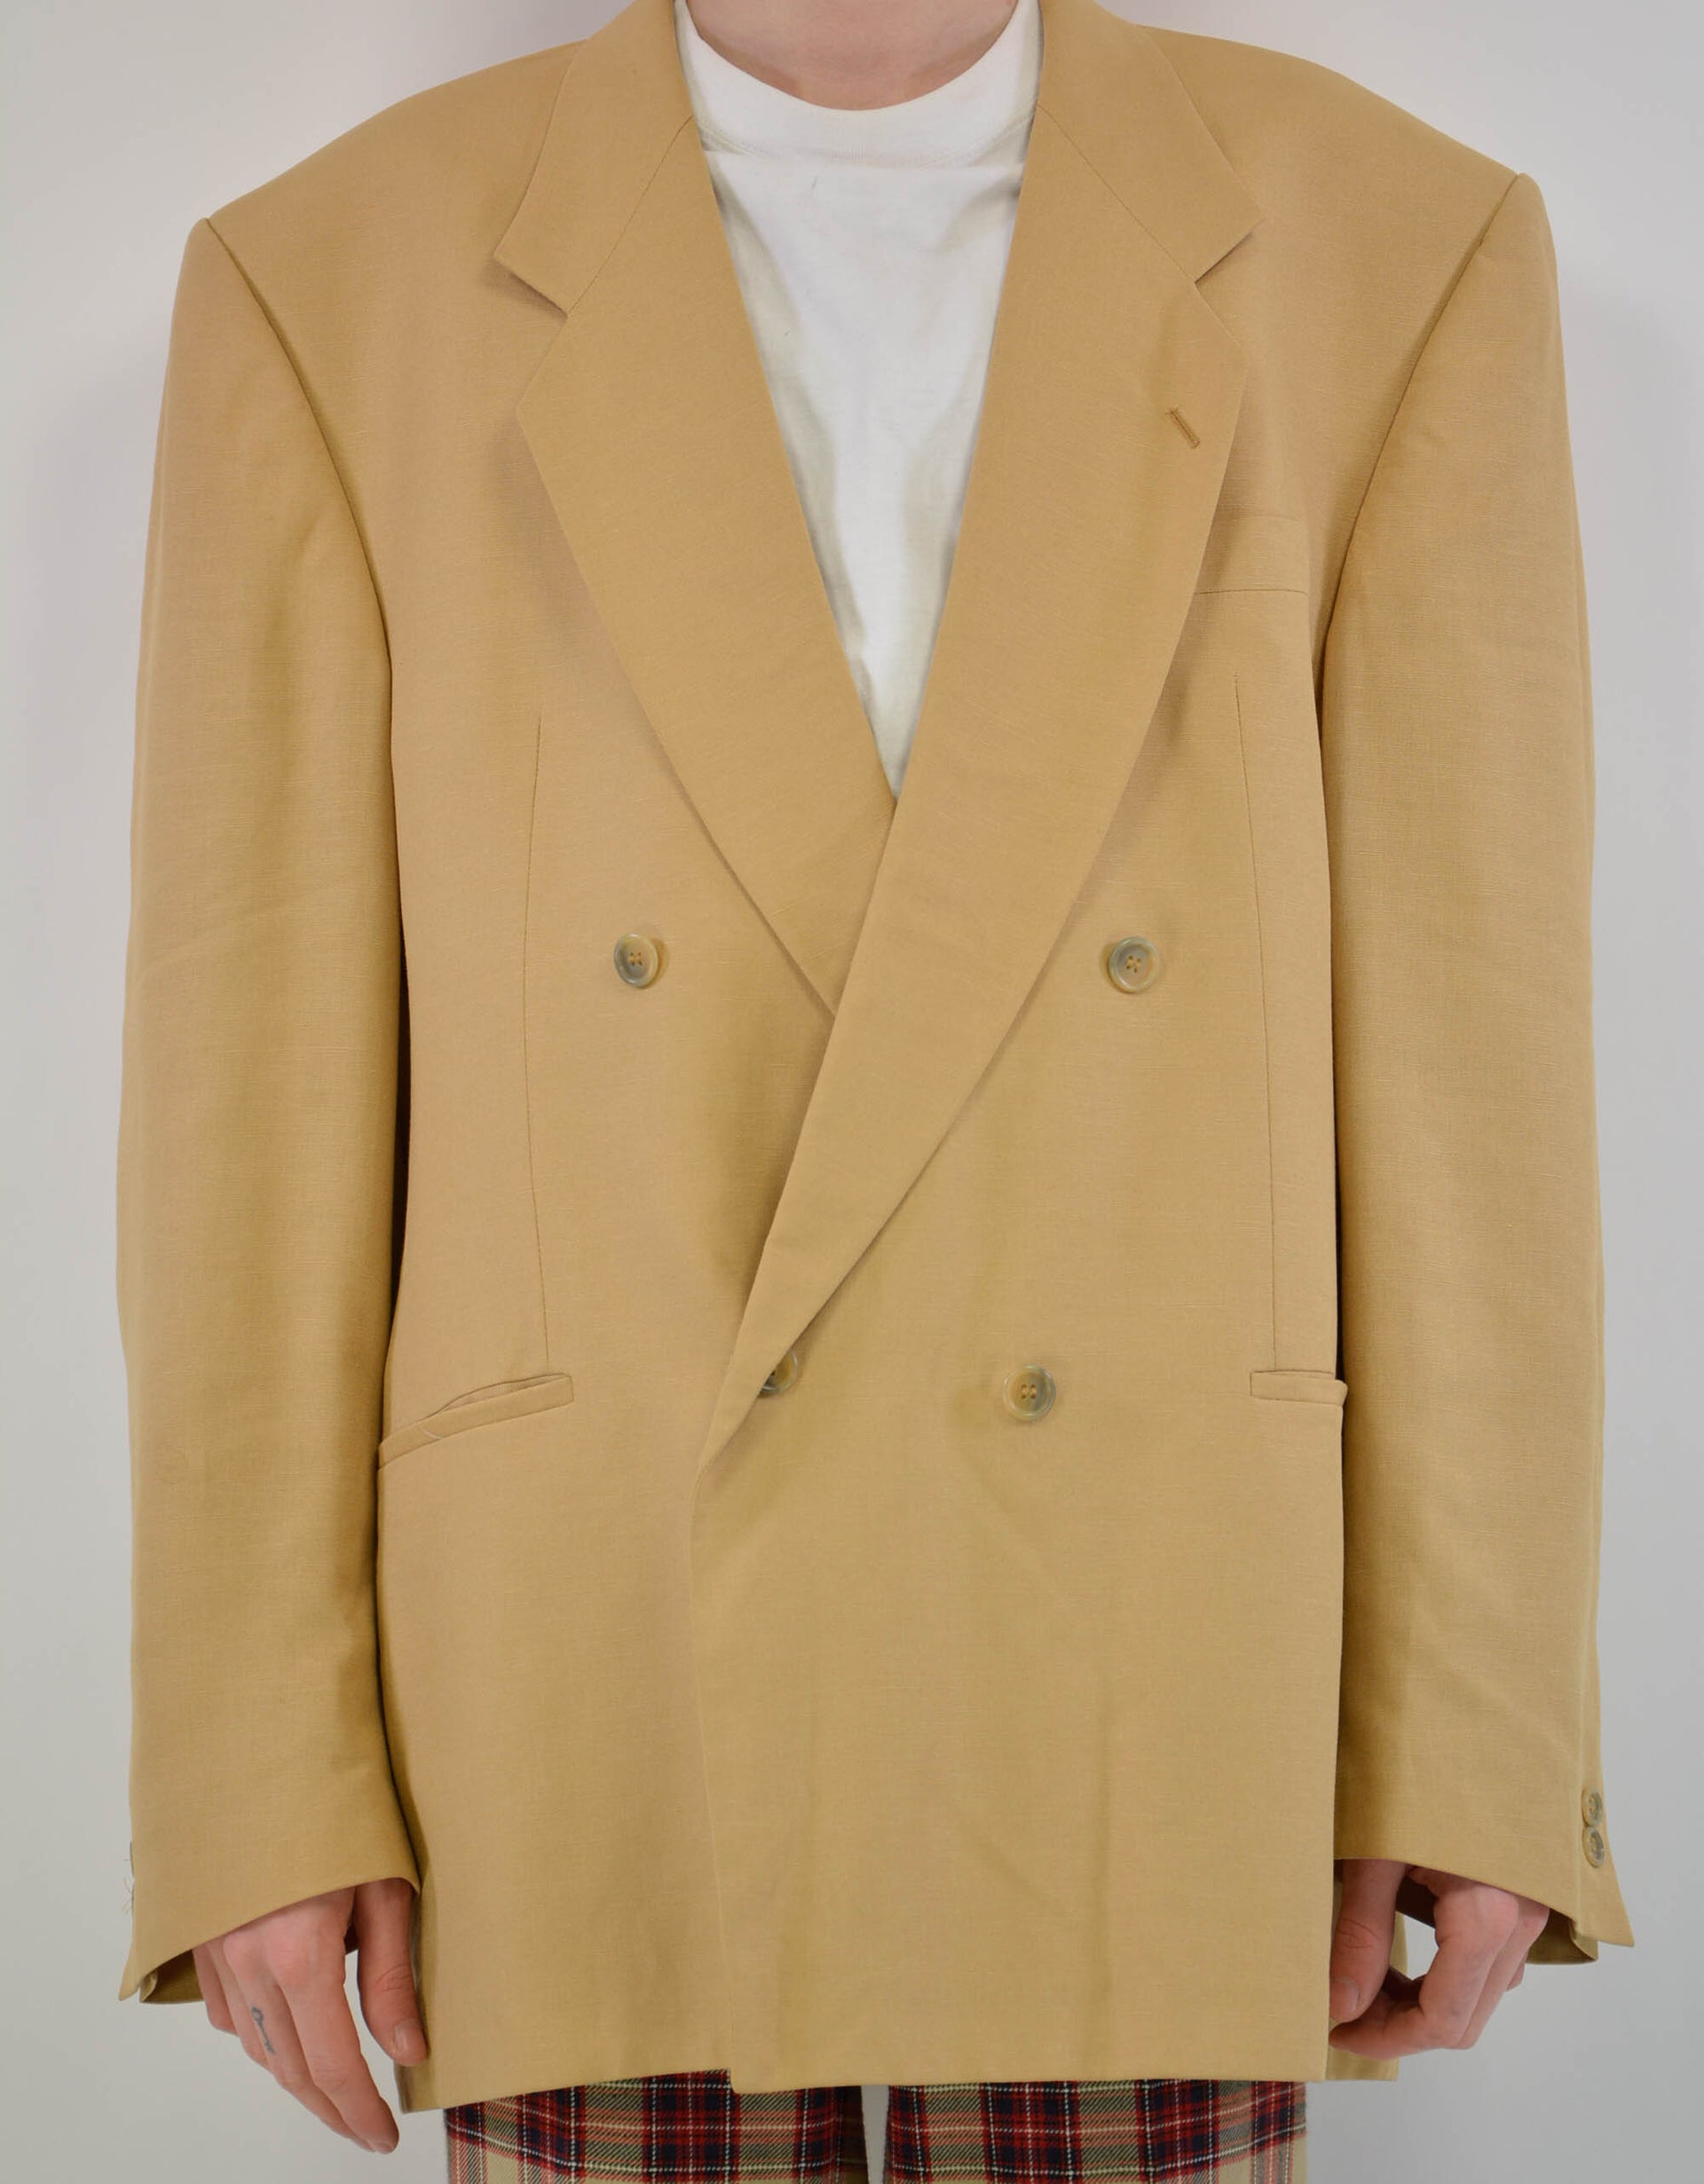 Gold double breasted blazer - PICKNWEIGHT - VINTAGE KILO STORE